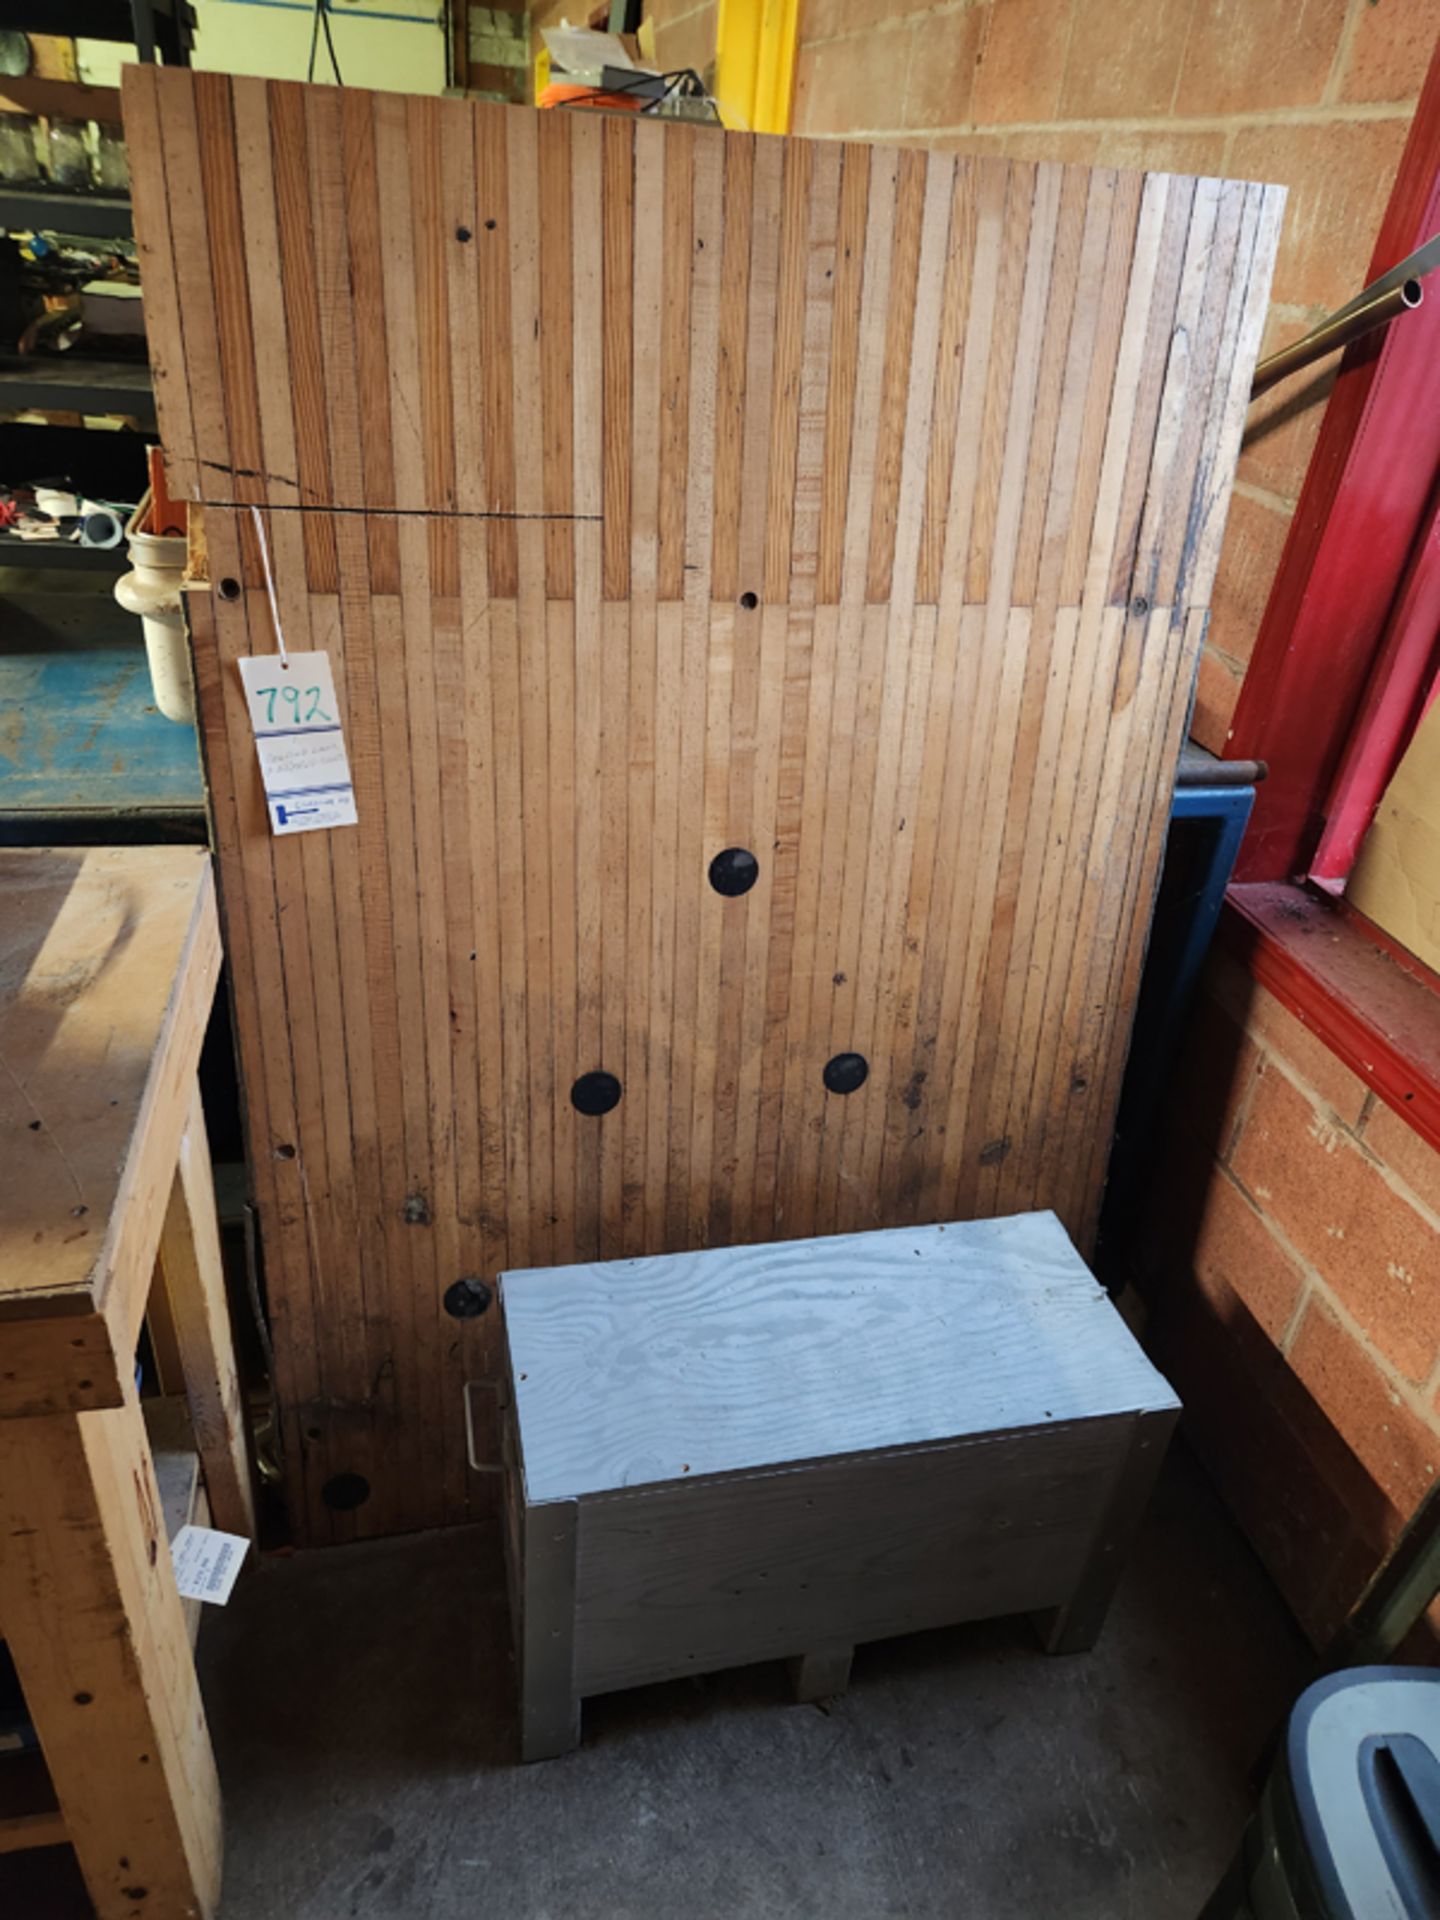 BOWLING LANE AND SHIPPING CRATE